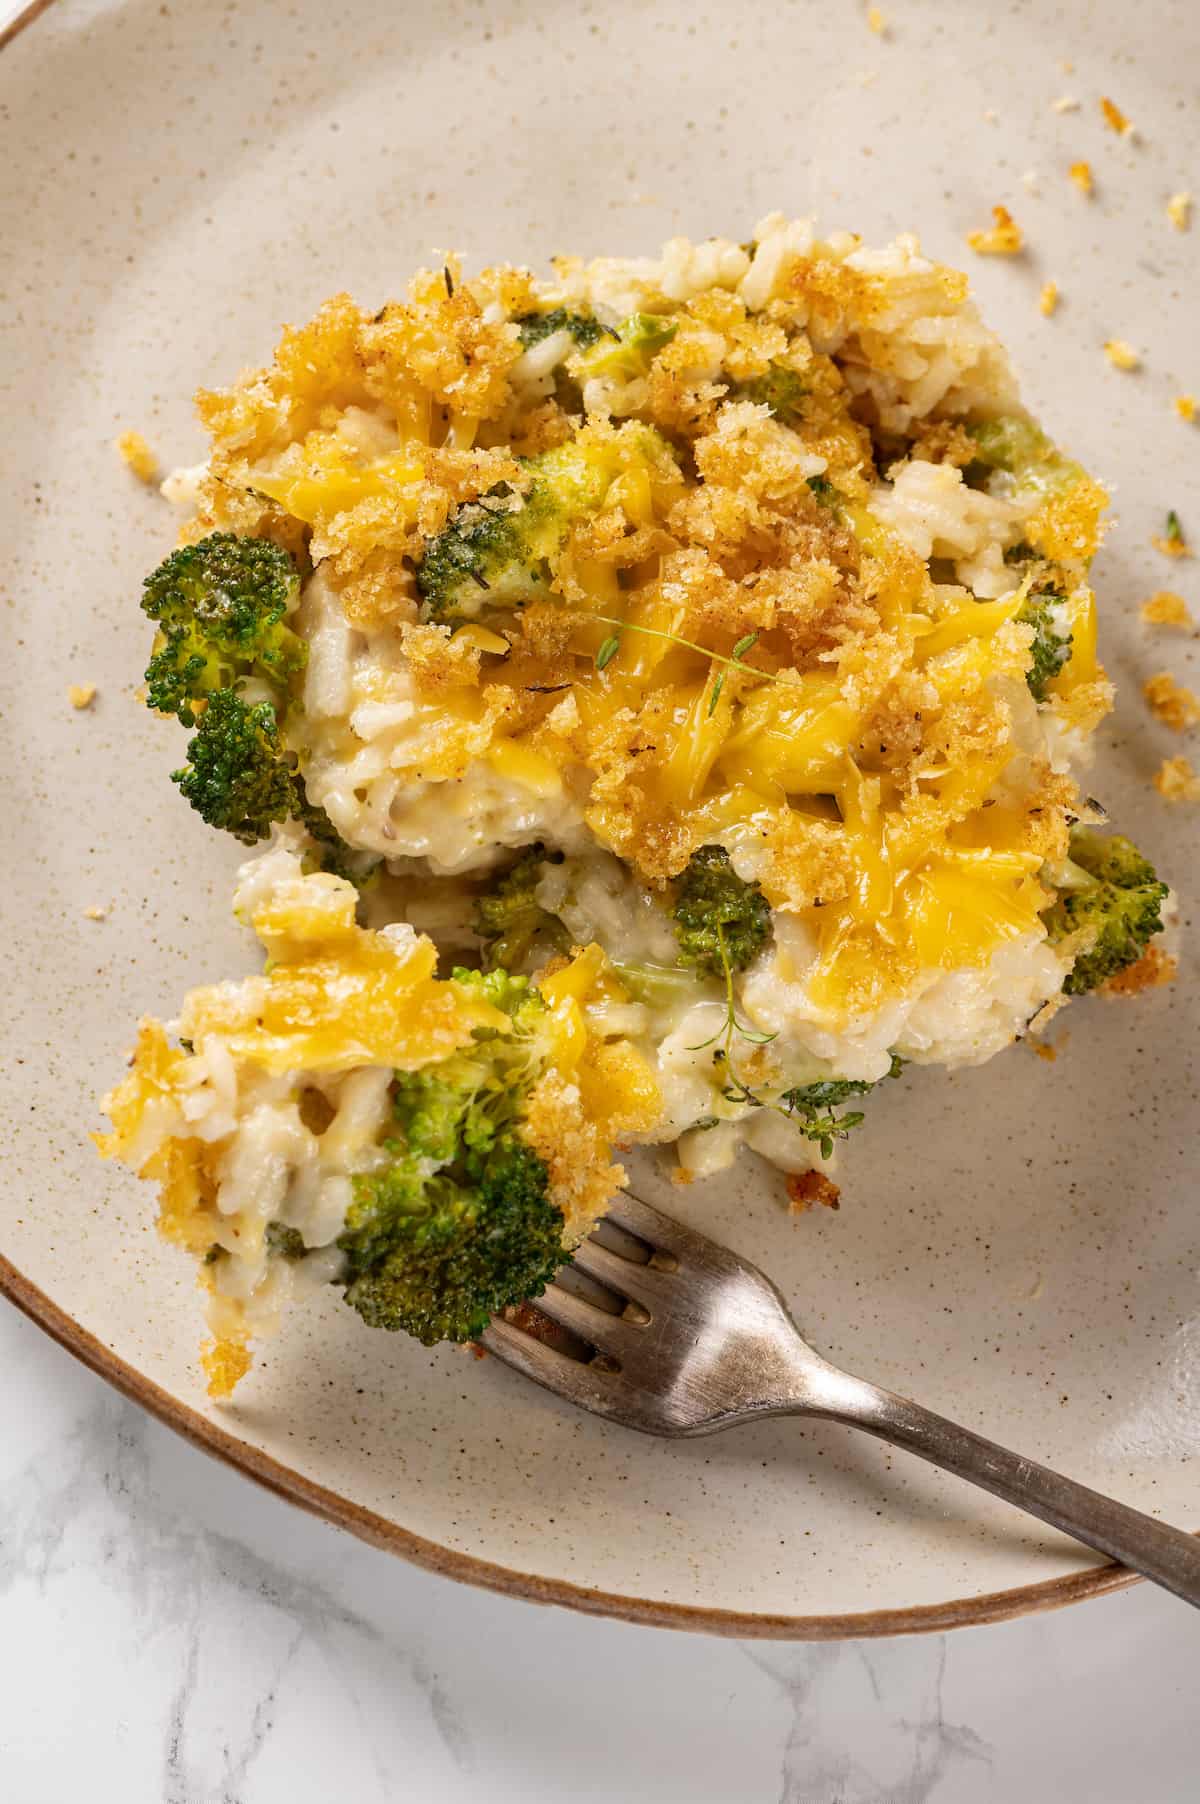 Plate with serving of broccoli cheese rice casserole and fork